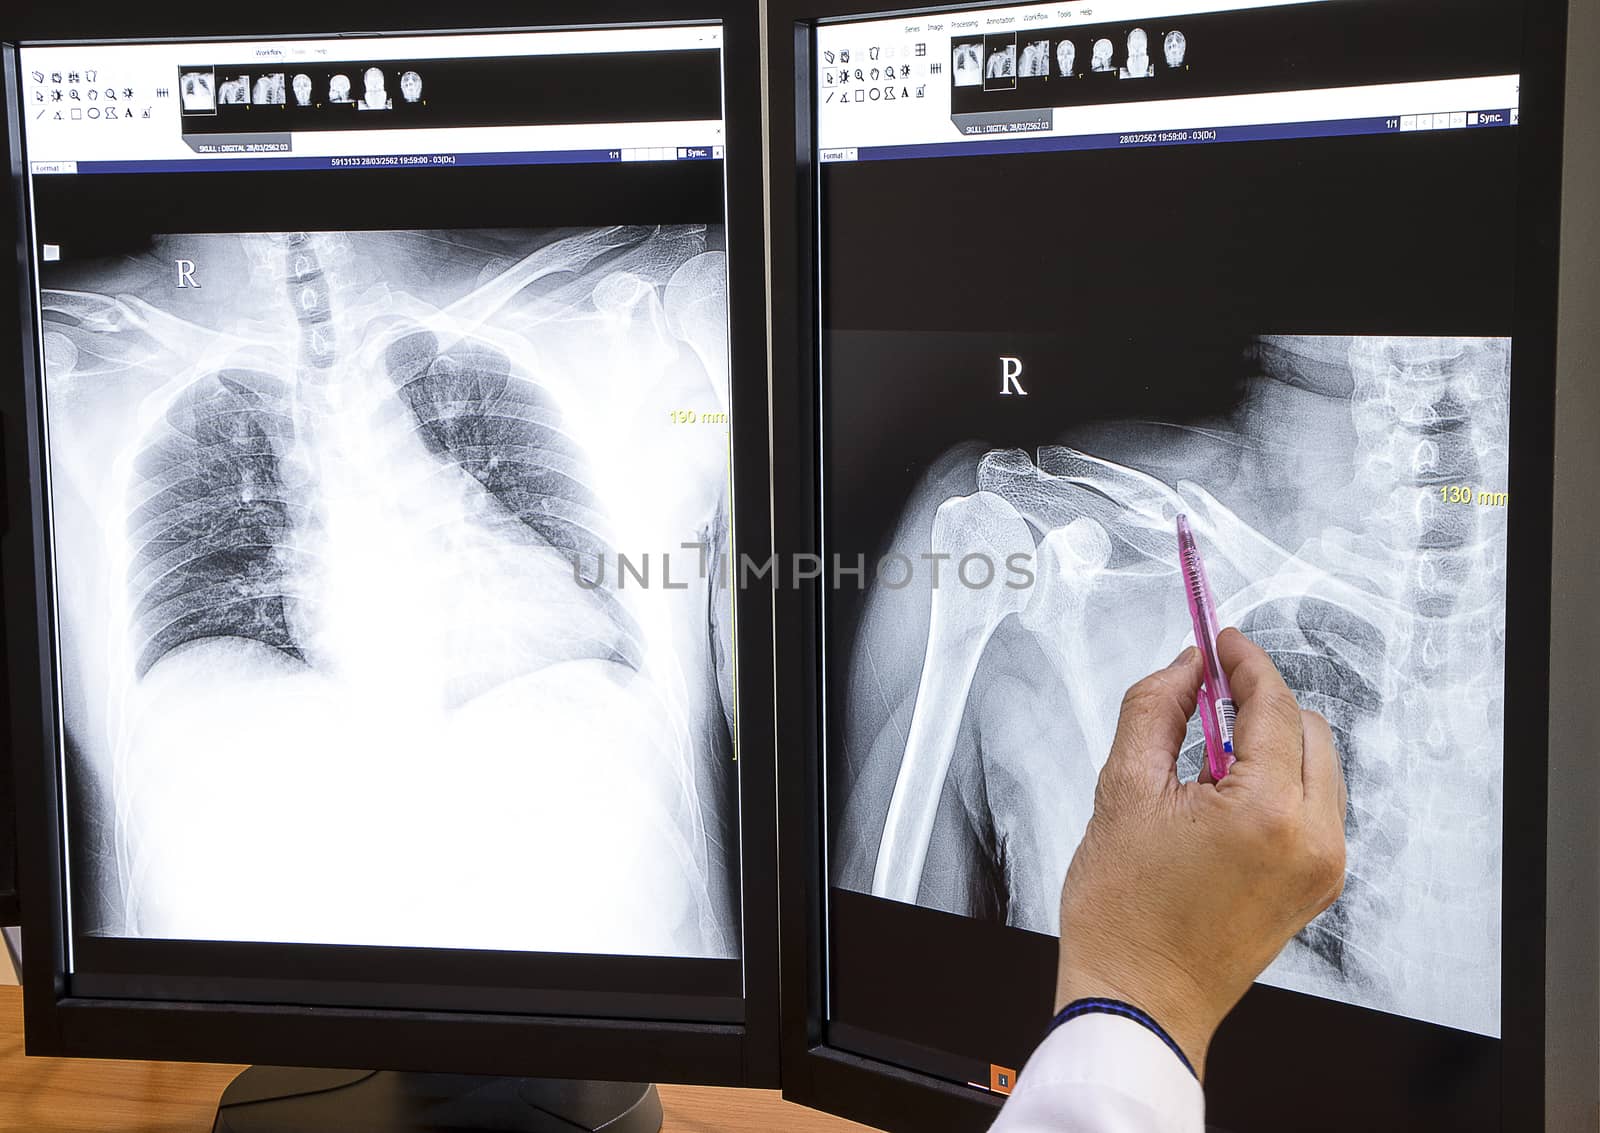 A medical doctor checking at xray images on a large double screen computer workstation. The patient has traumatic fracture of right clavicle and right ribs.